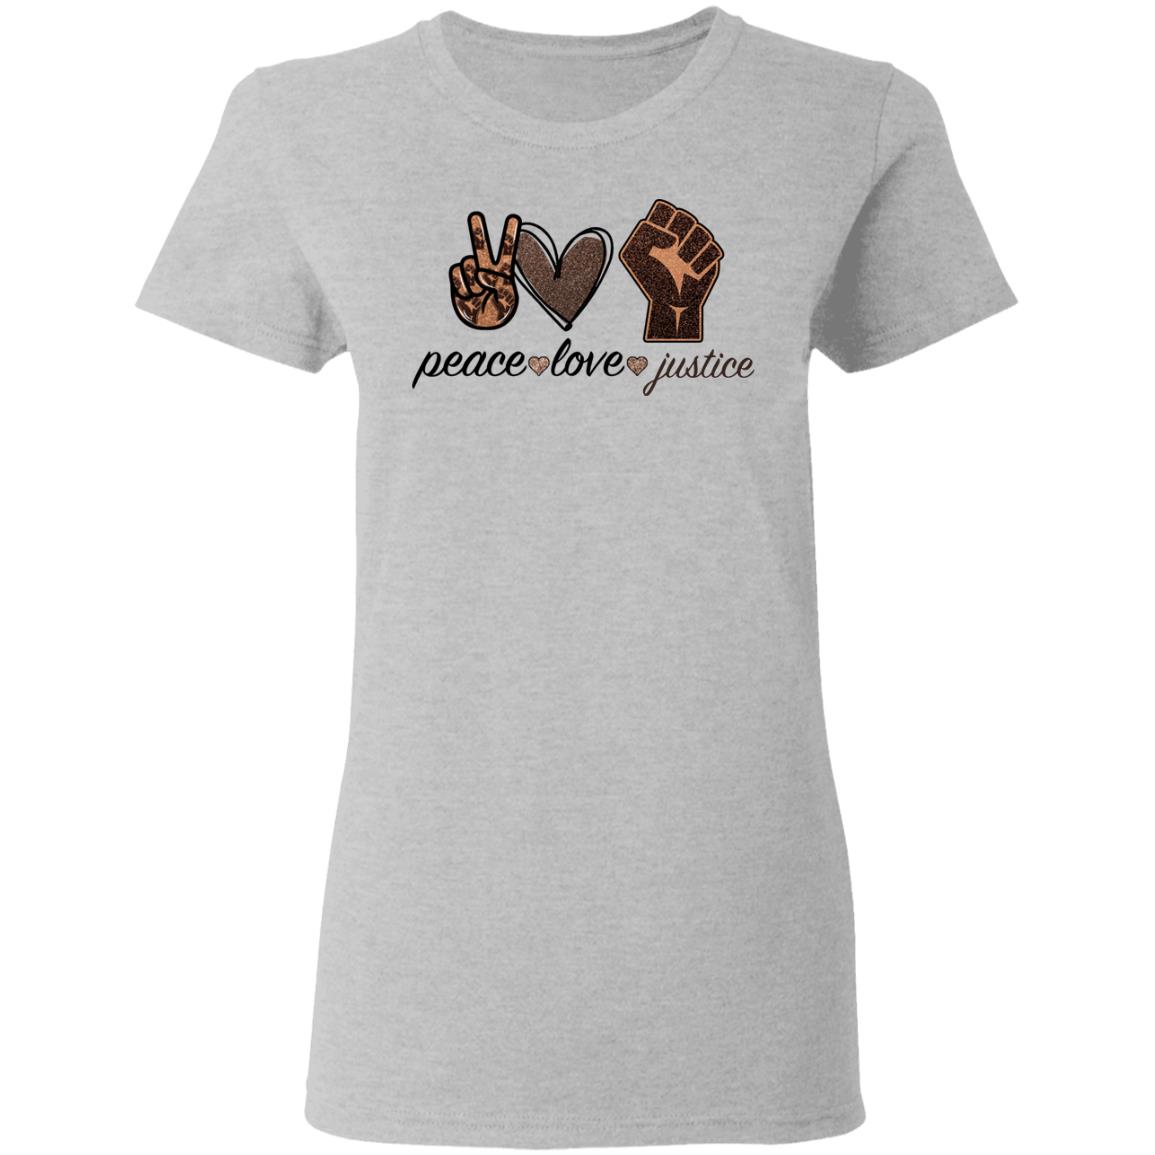 Download Peace love justice shirt - Rockatee